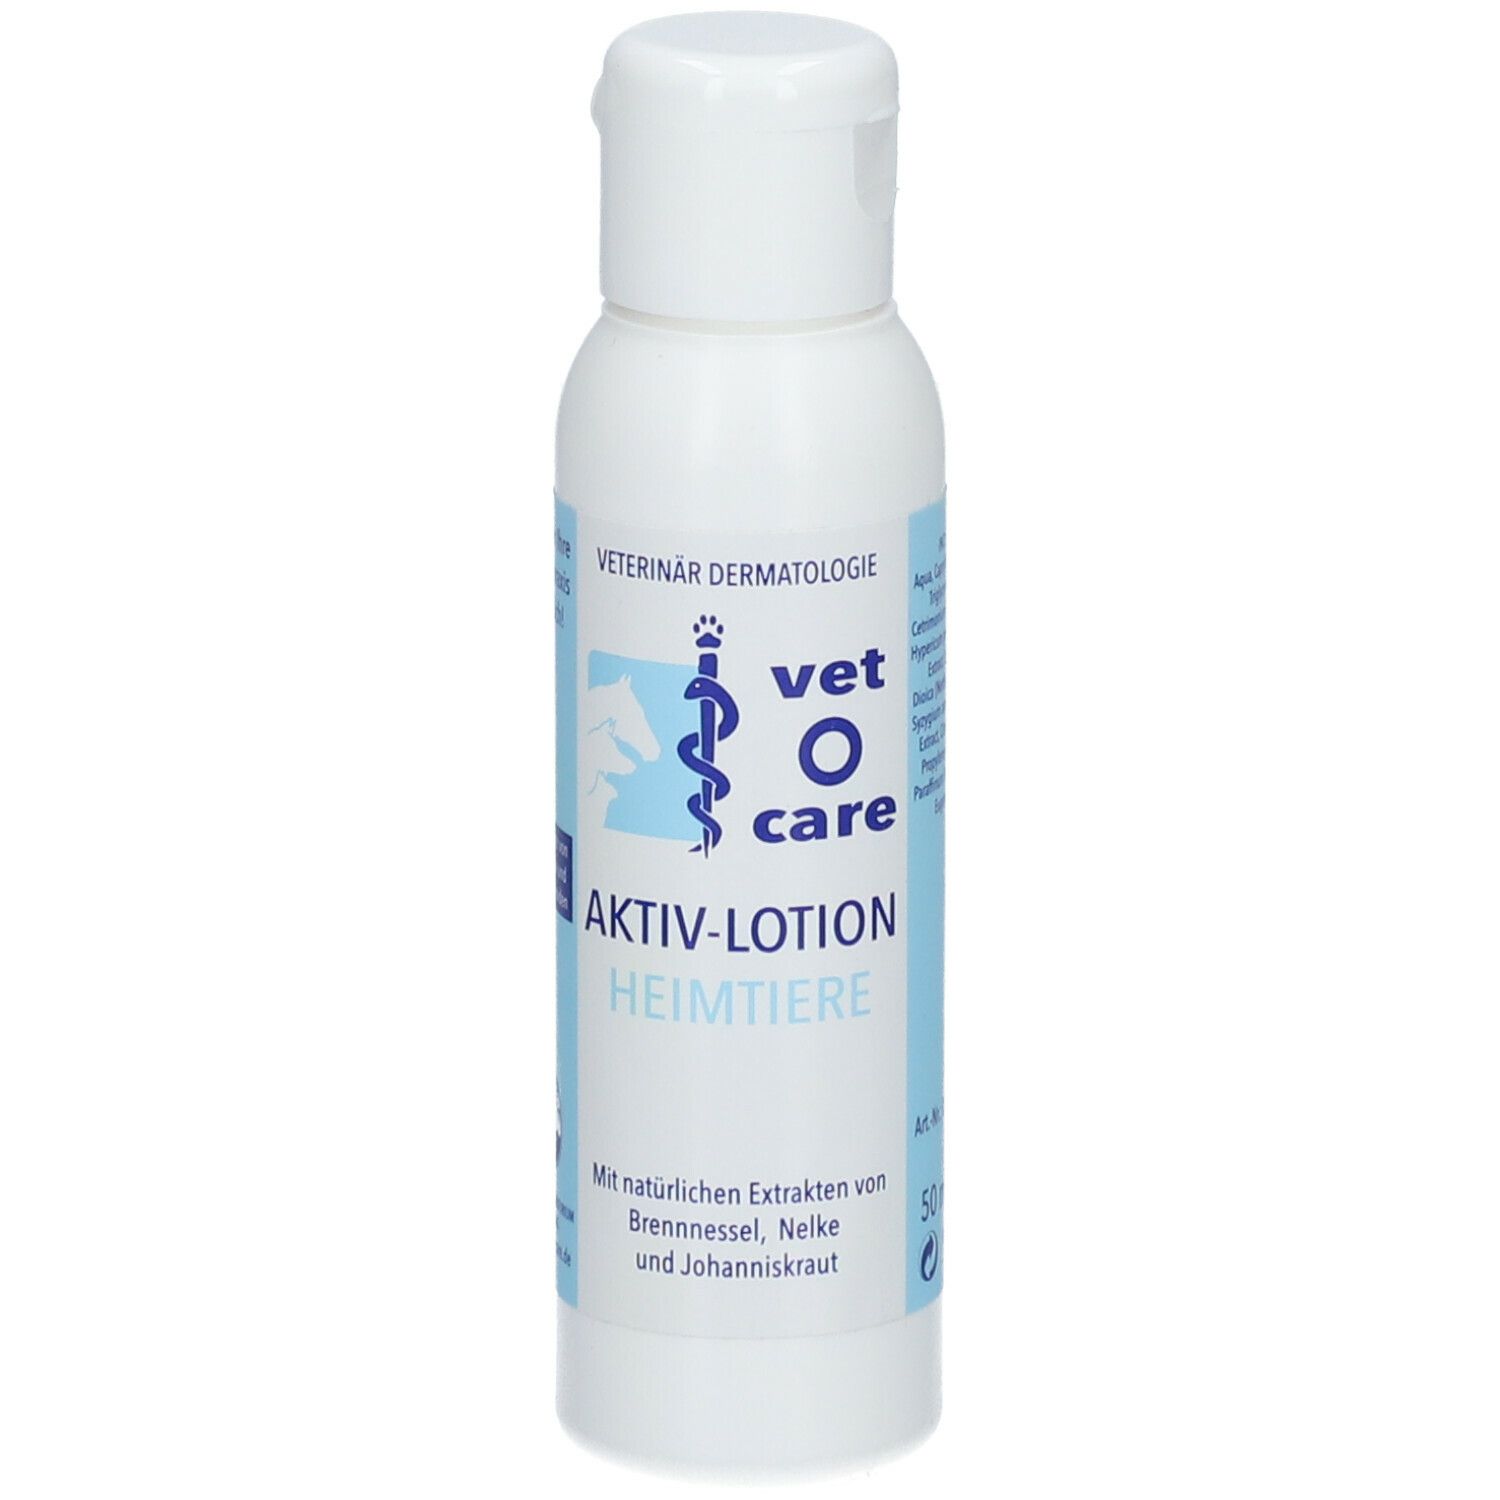 vet-o-care® Lotion active